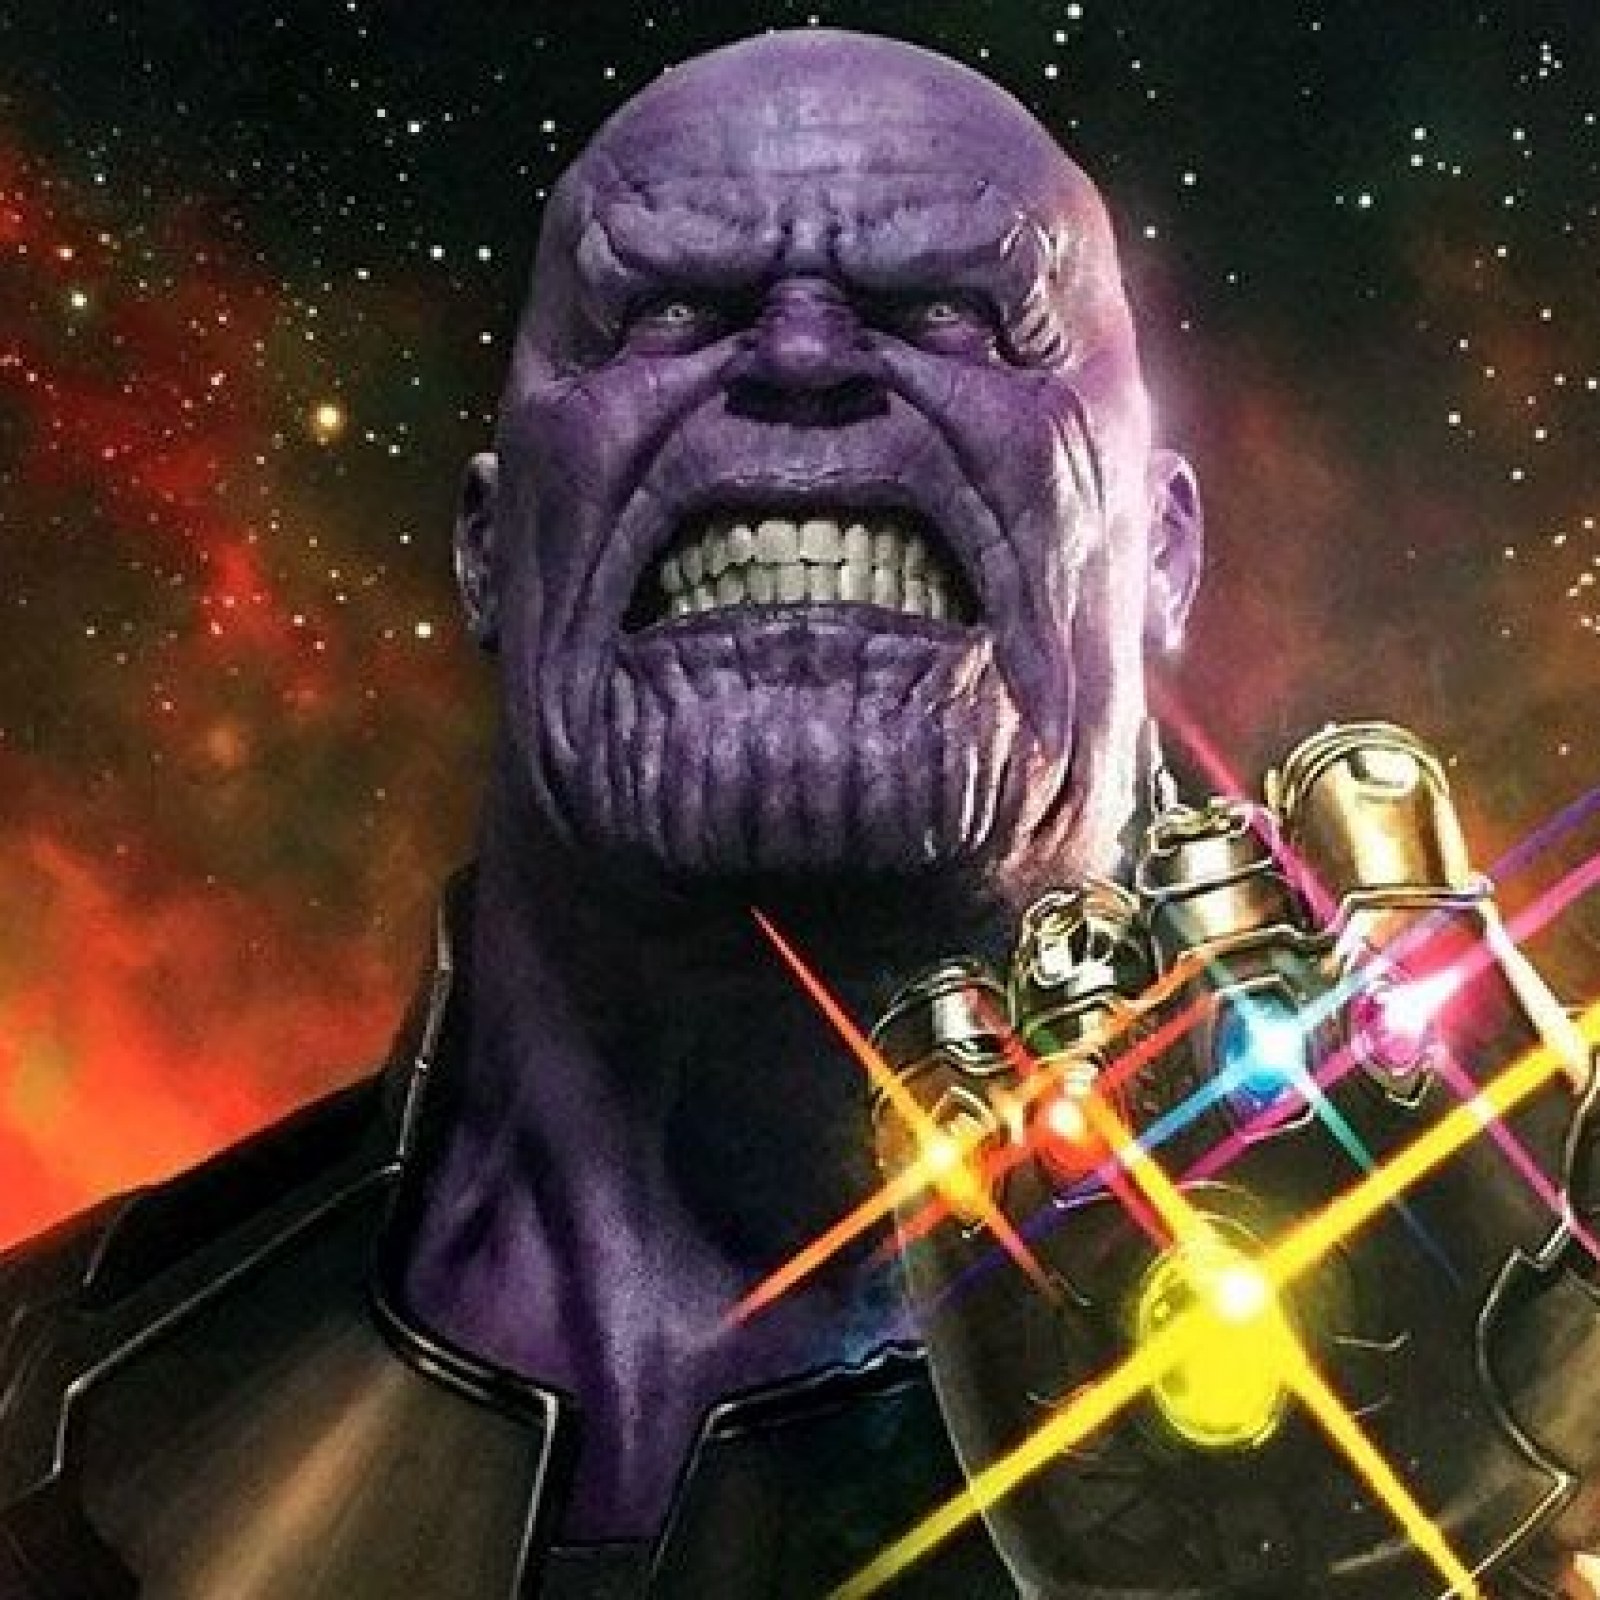 Avengers 4 Theories What Is The Seventh Infinity Stone The Ego Gem Could Play A Huge Role In The Next Avenger S Movie